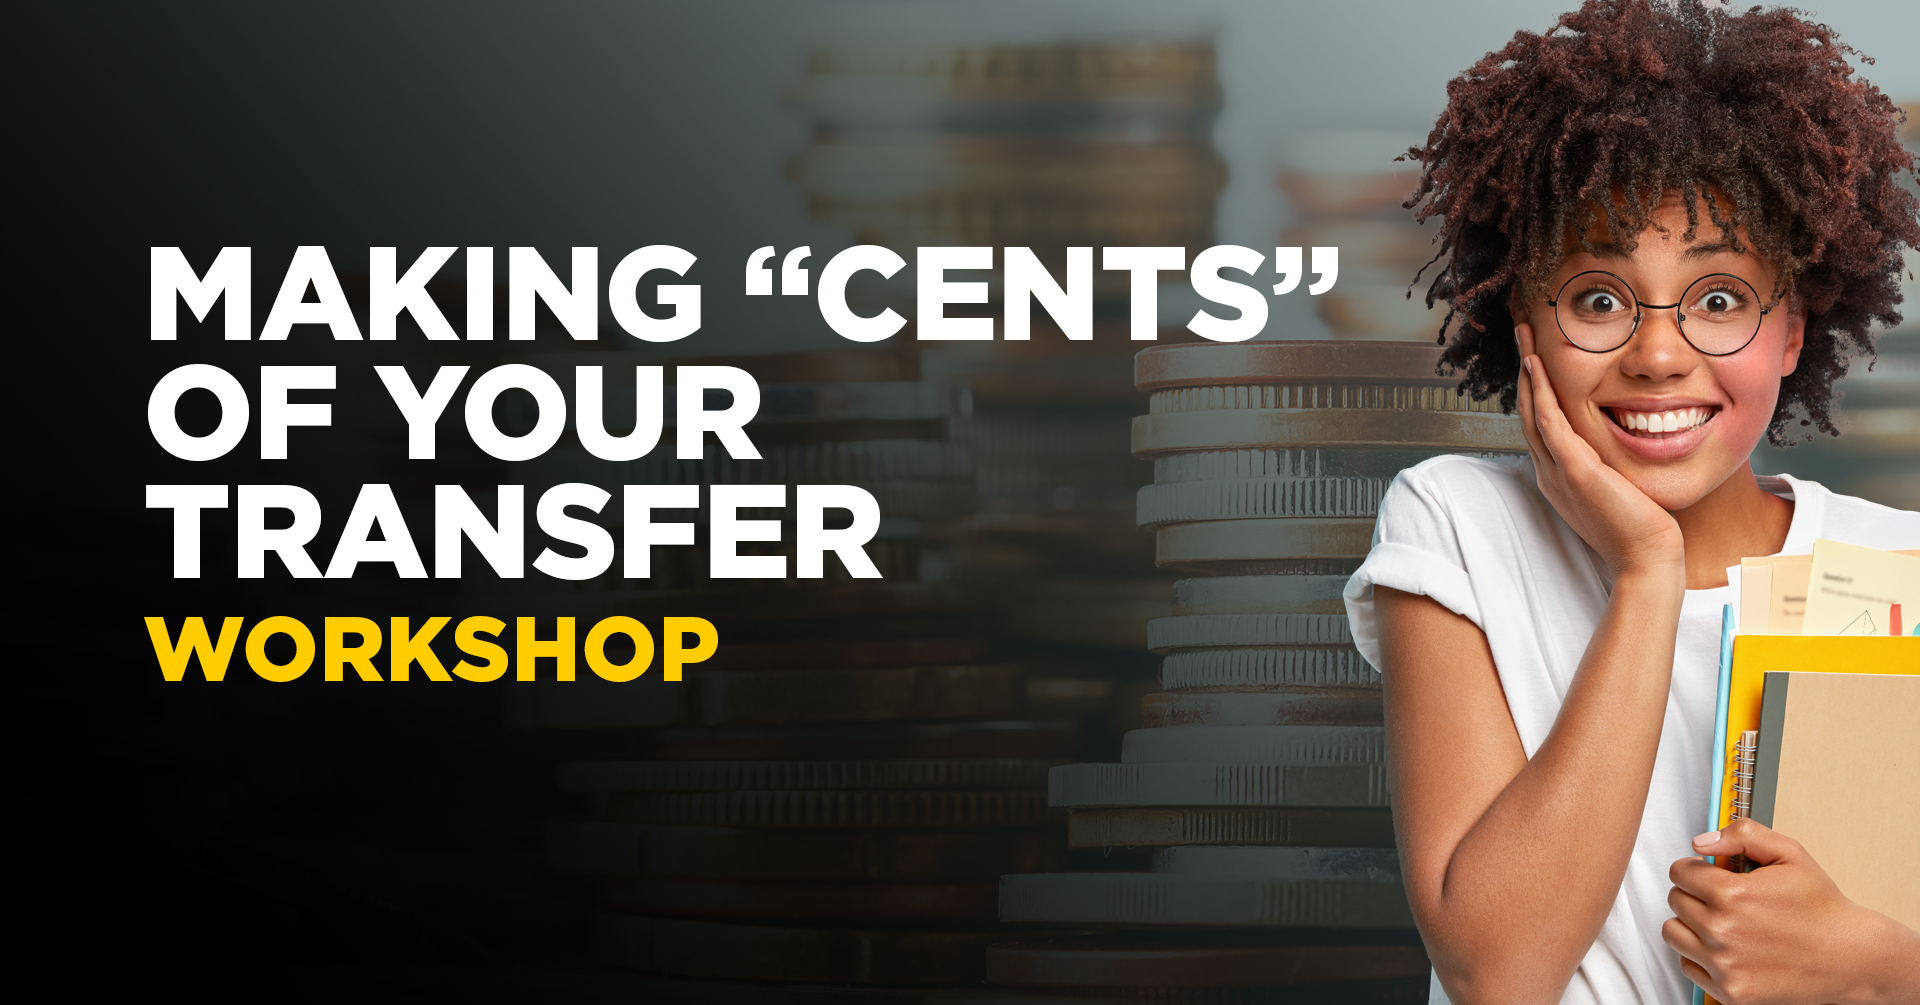 Making Cents of your Transfer